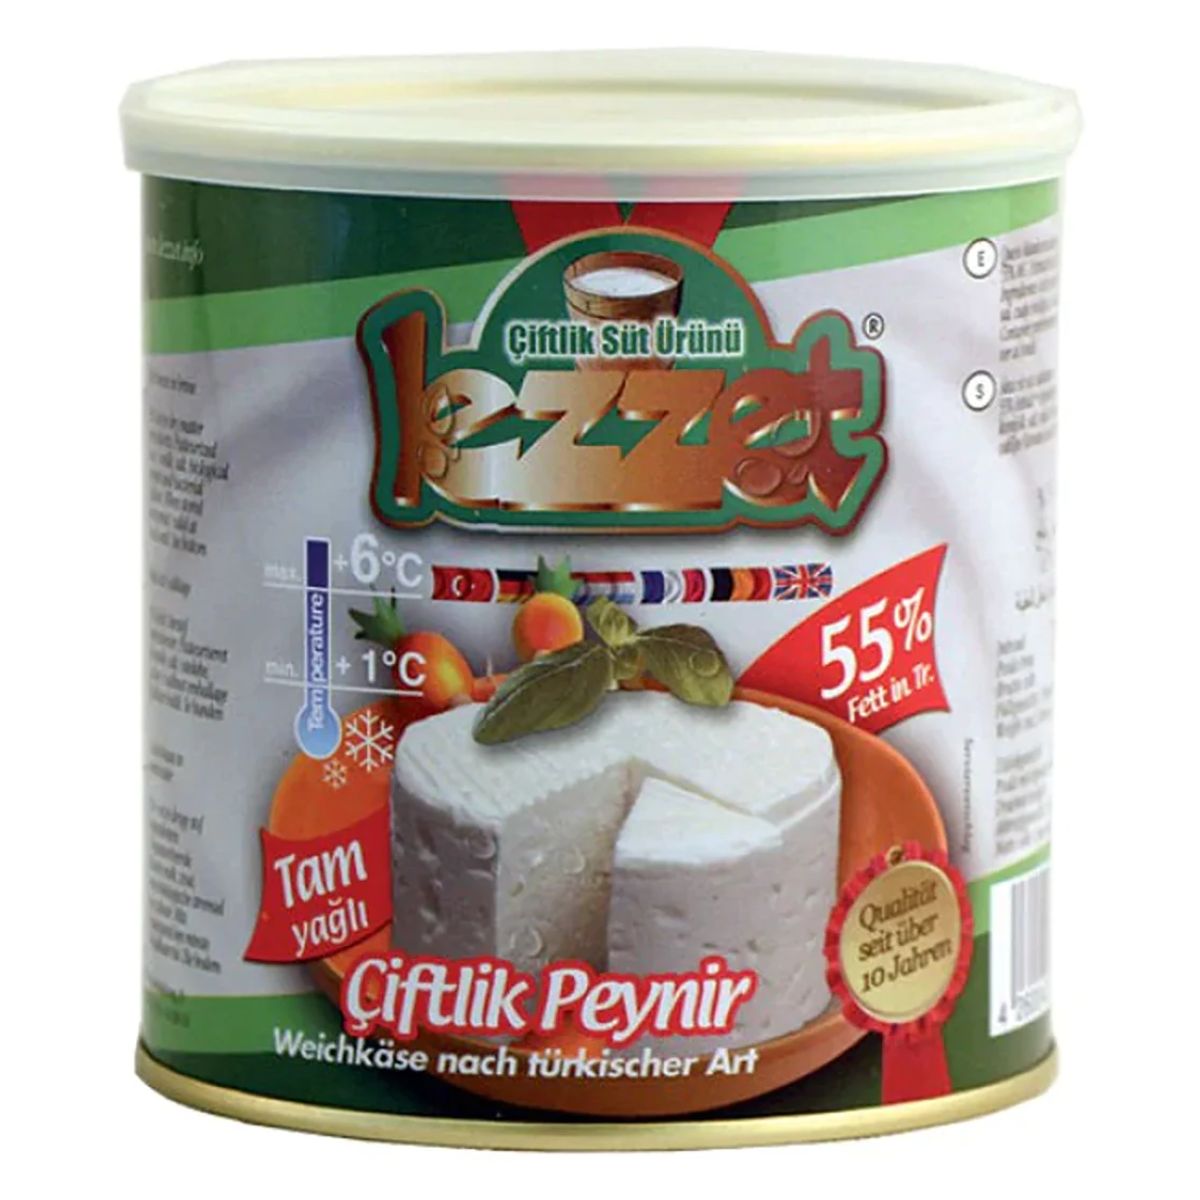 A tub of Lezzet - 55% Fat Cow Cheese - 400g marketed under the brand "kezzet.